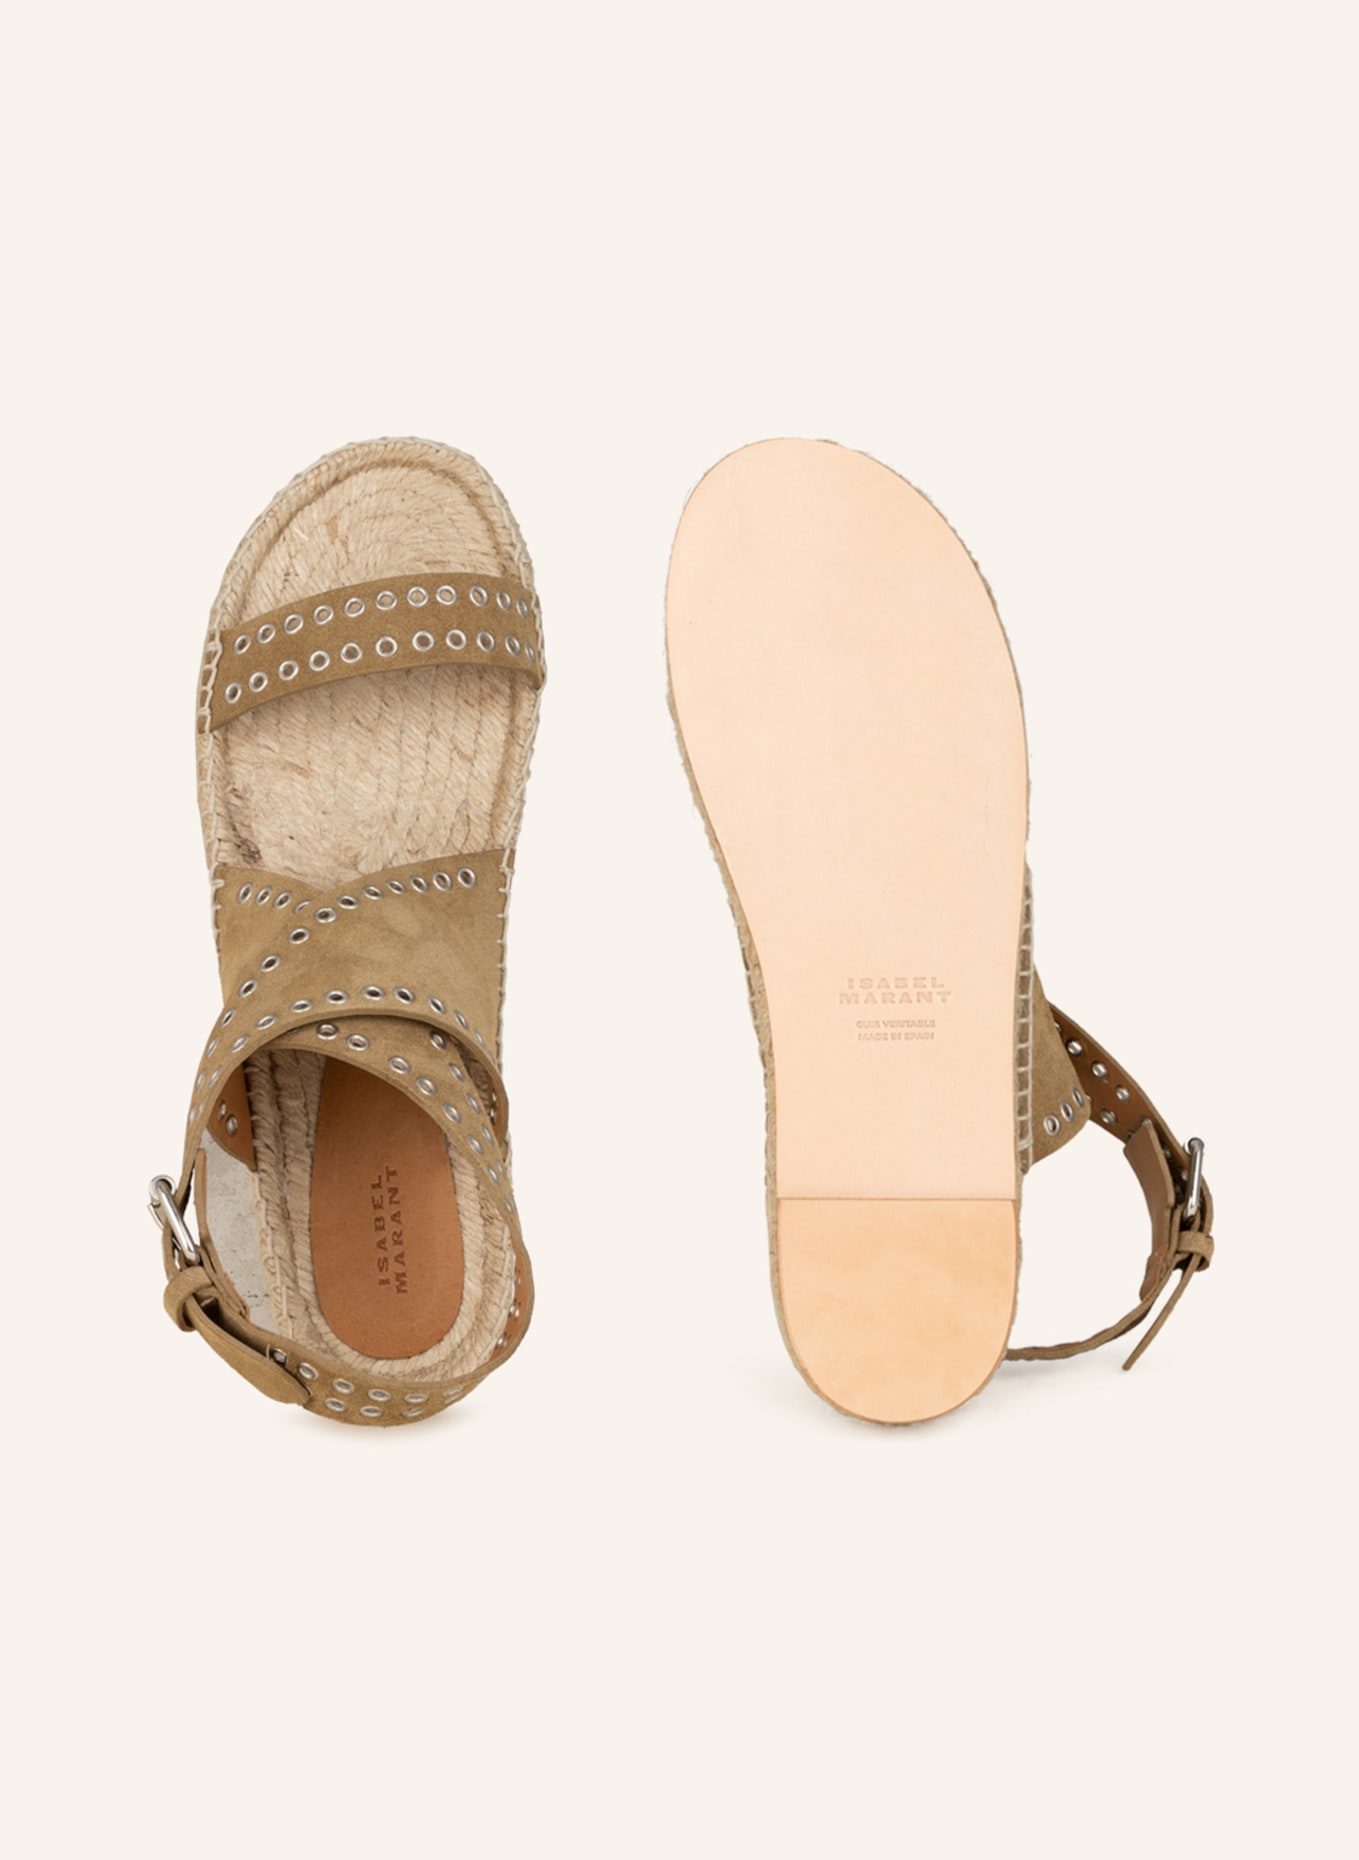 MARANT Sandals ILLYA with rivets in taupe